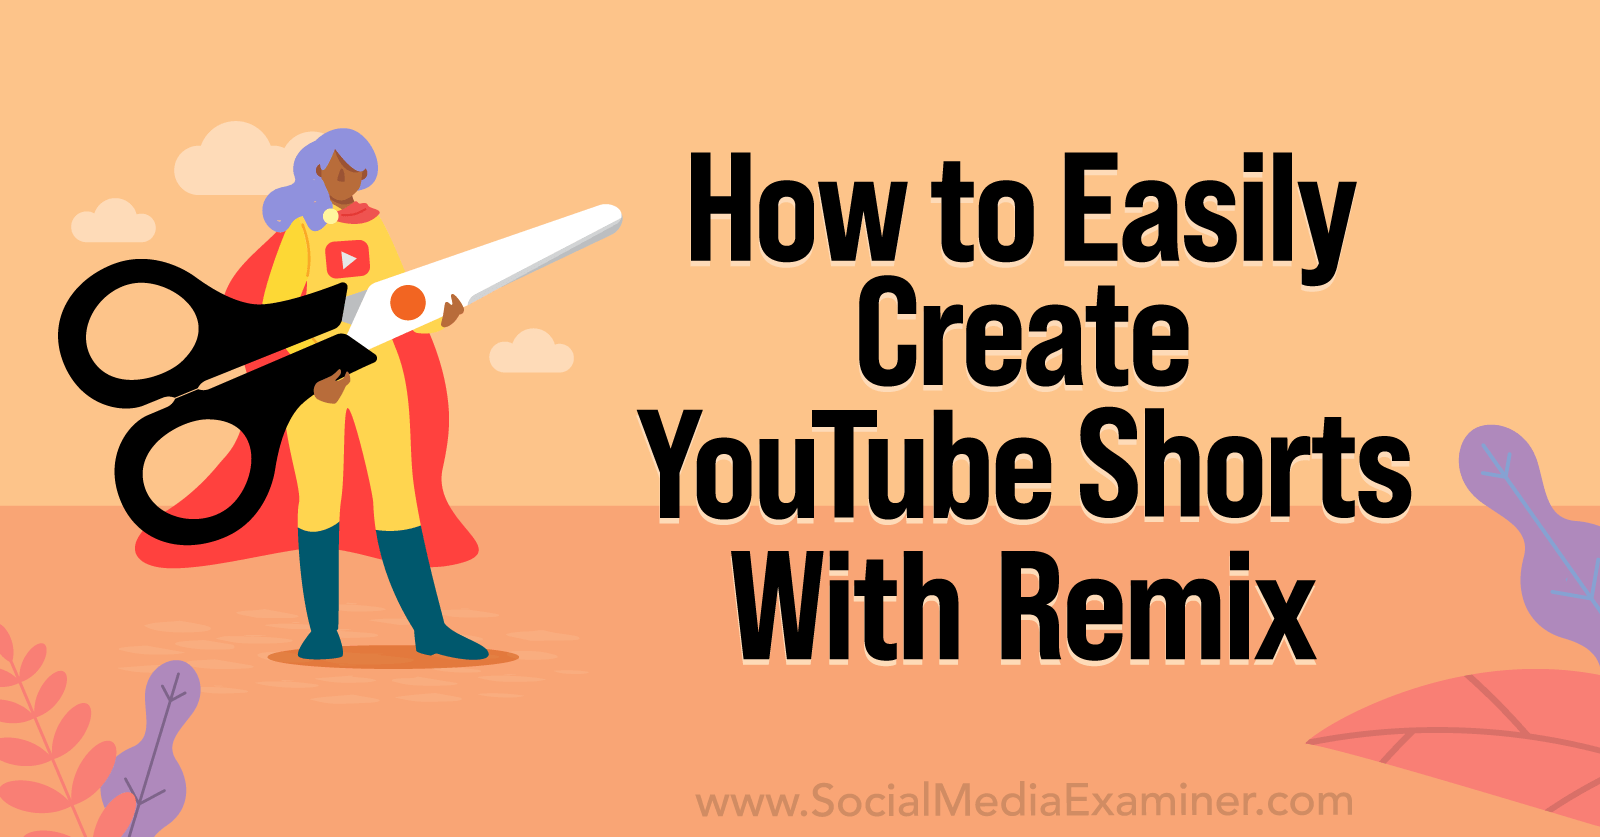 How to Easily Create YouTube Shorts With YouTube Remix-Social Media Examiner